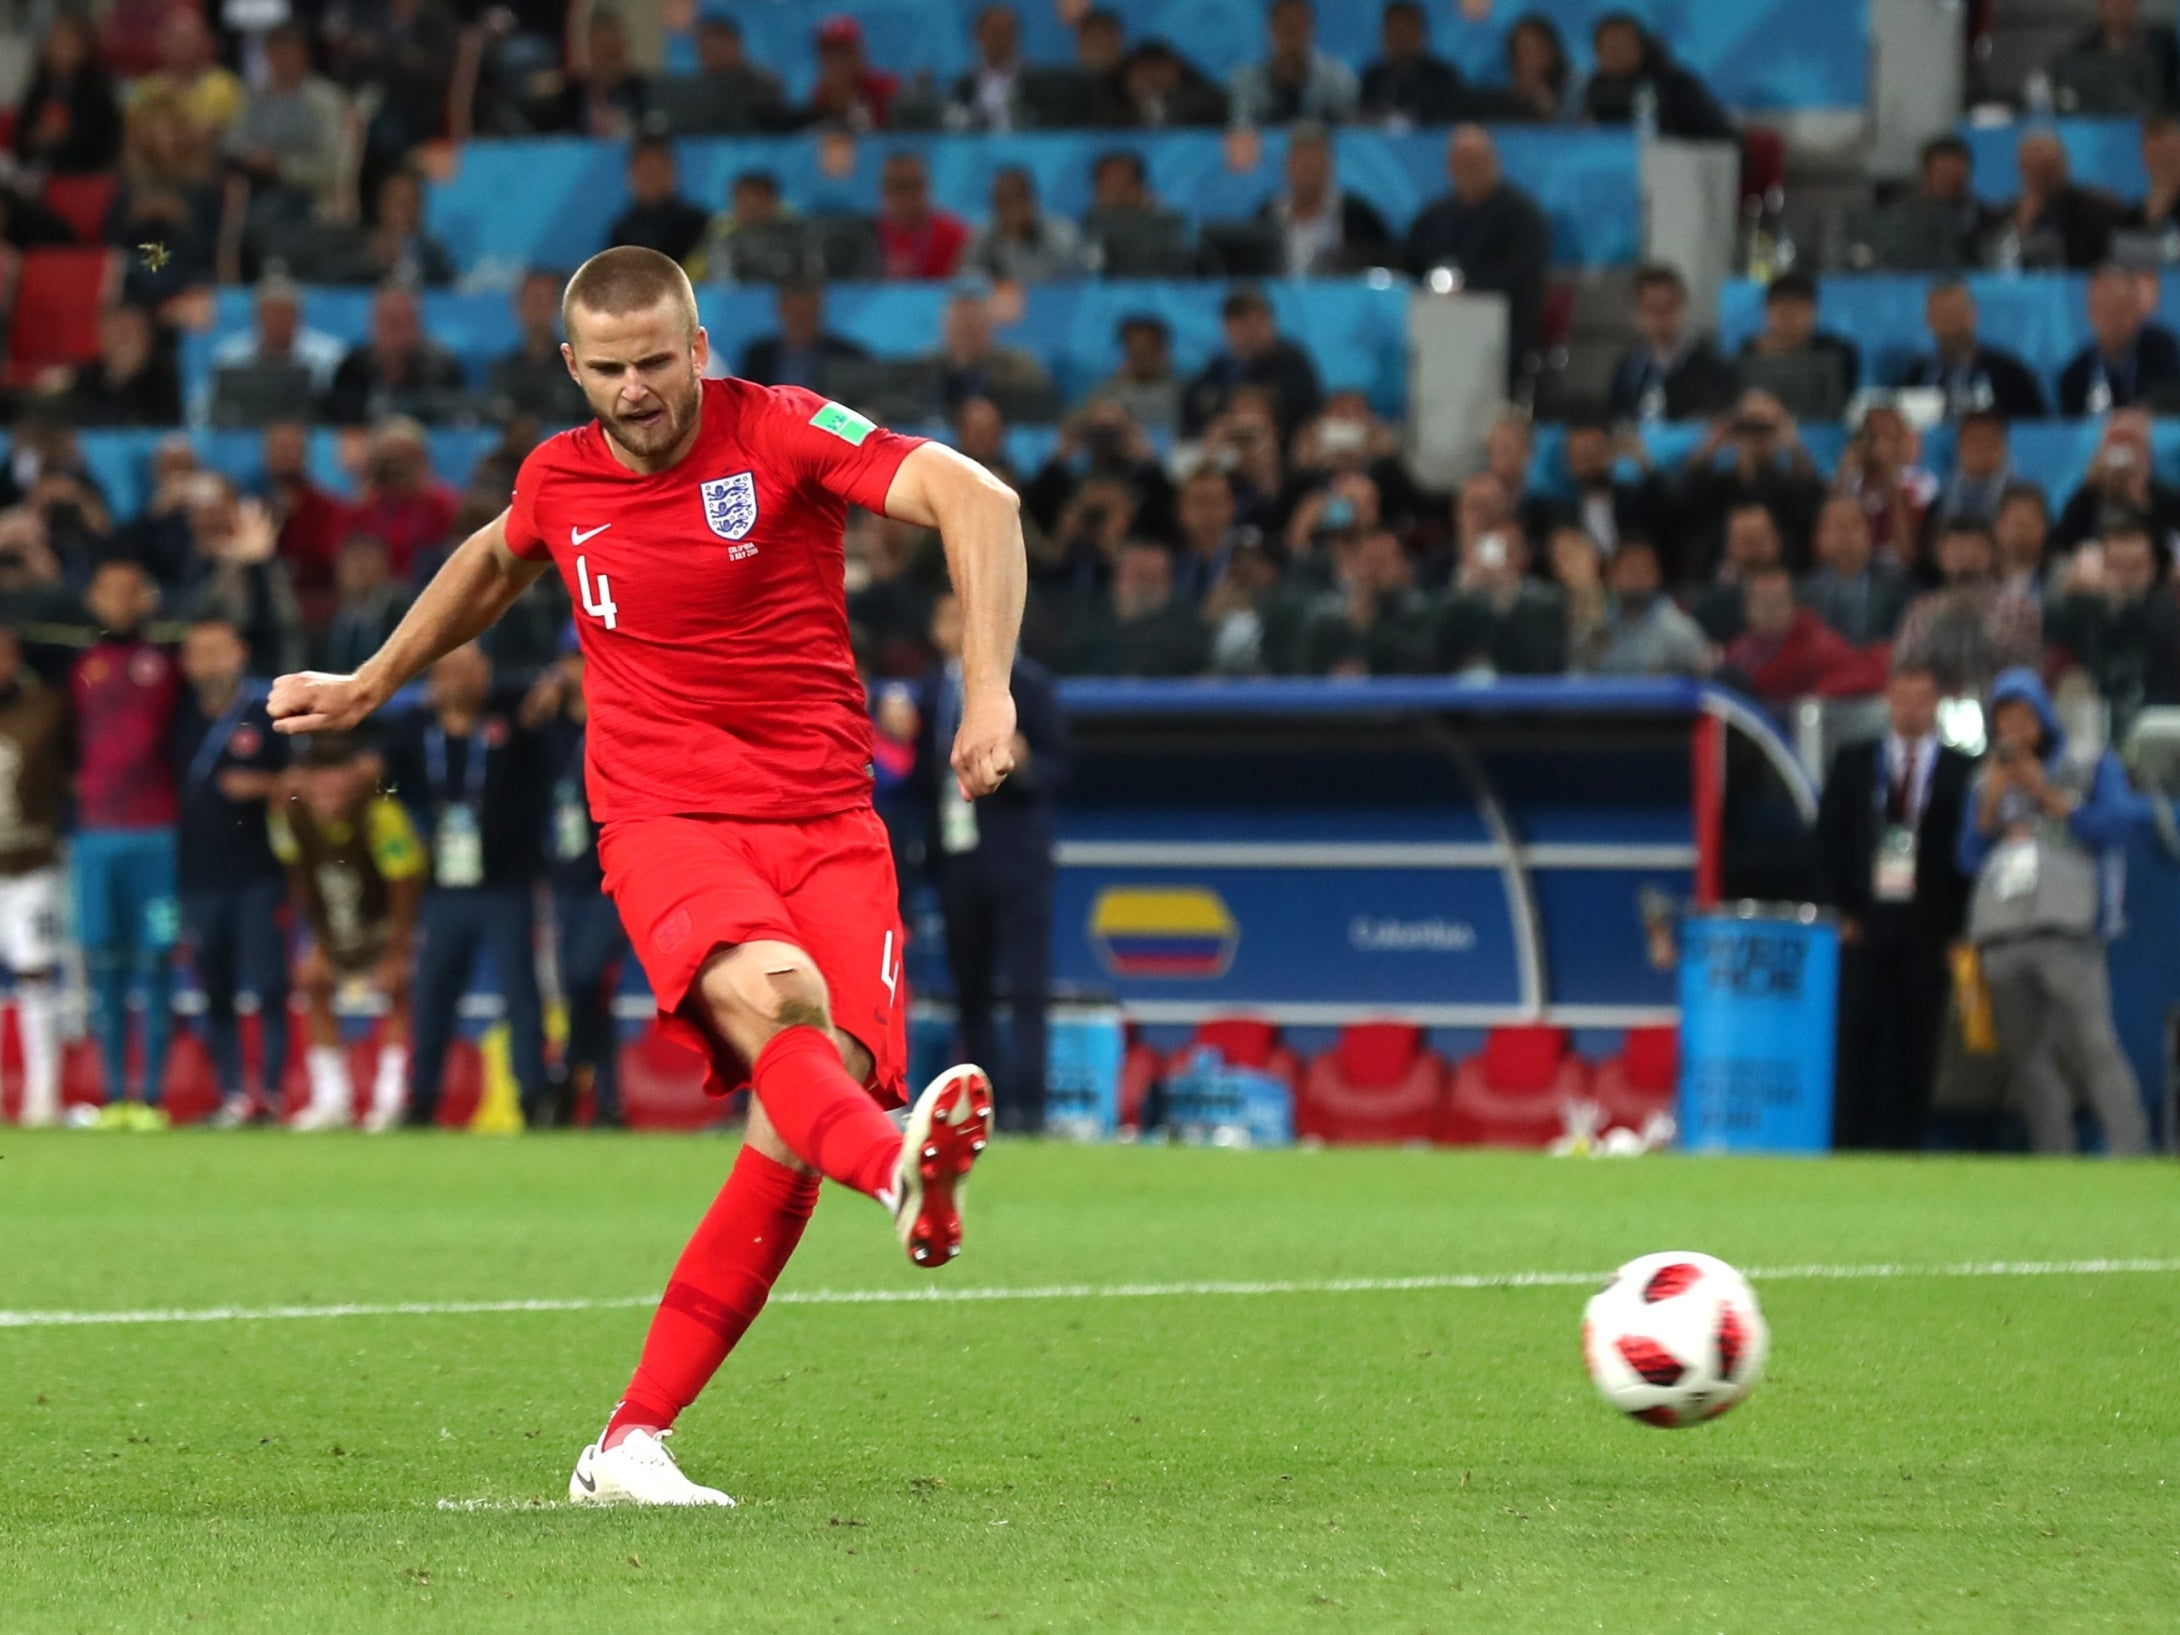 England vs Colombia: Live Updates, Score and Reaction from World Cup